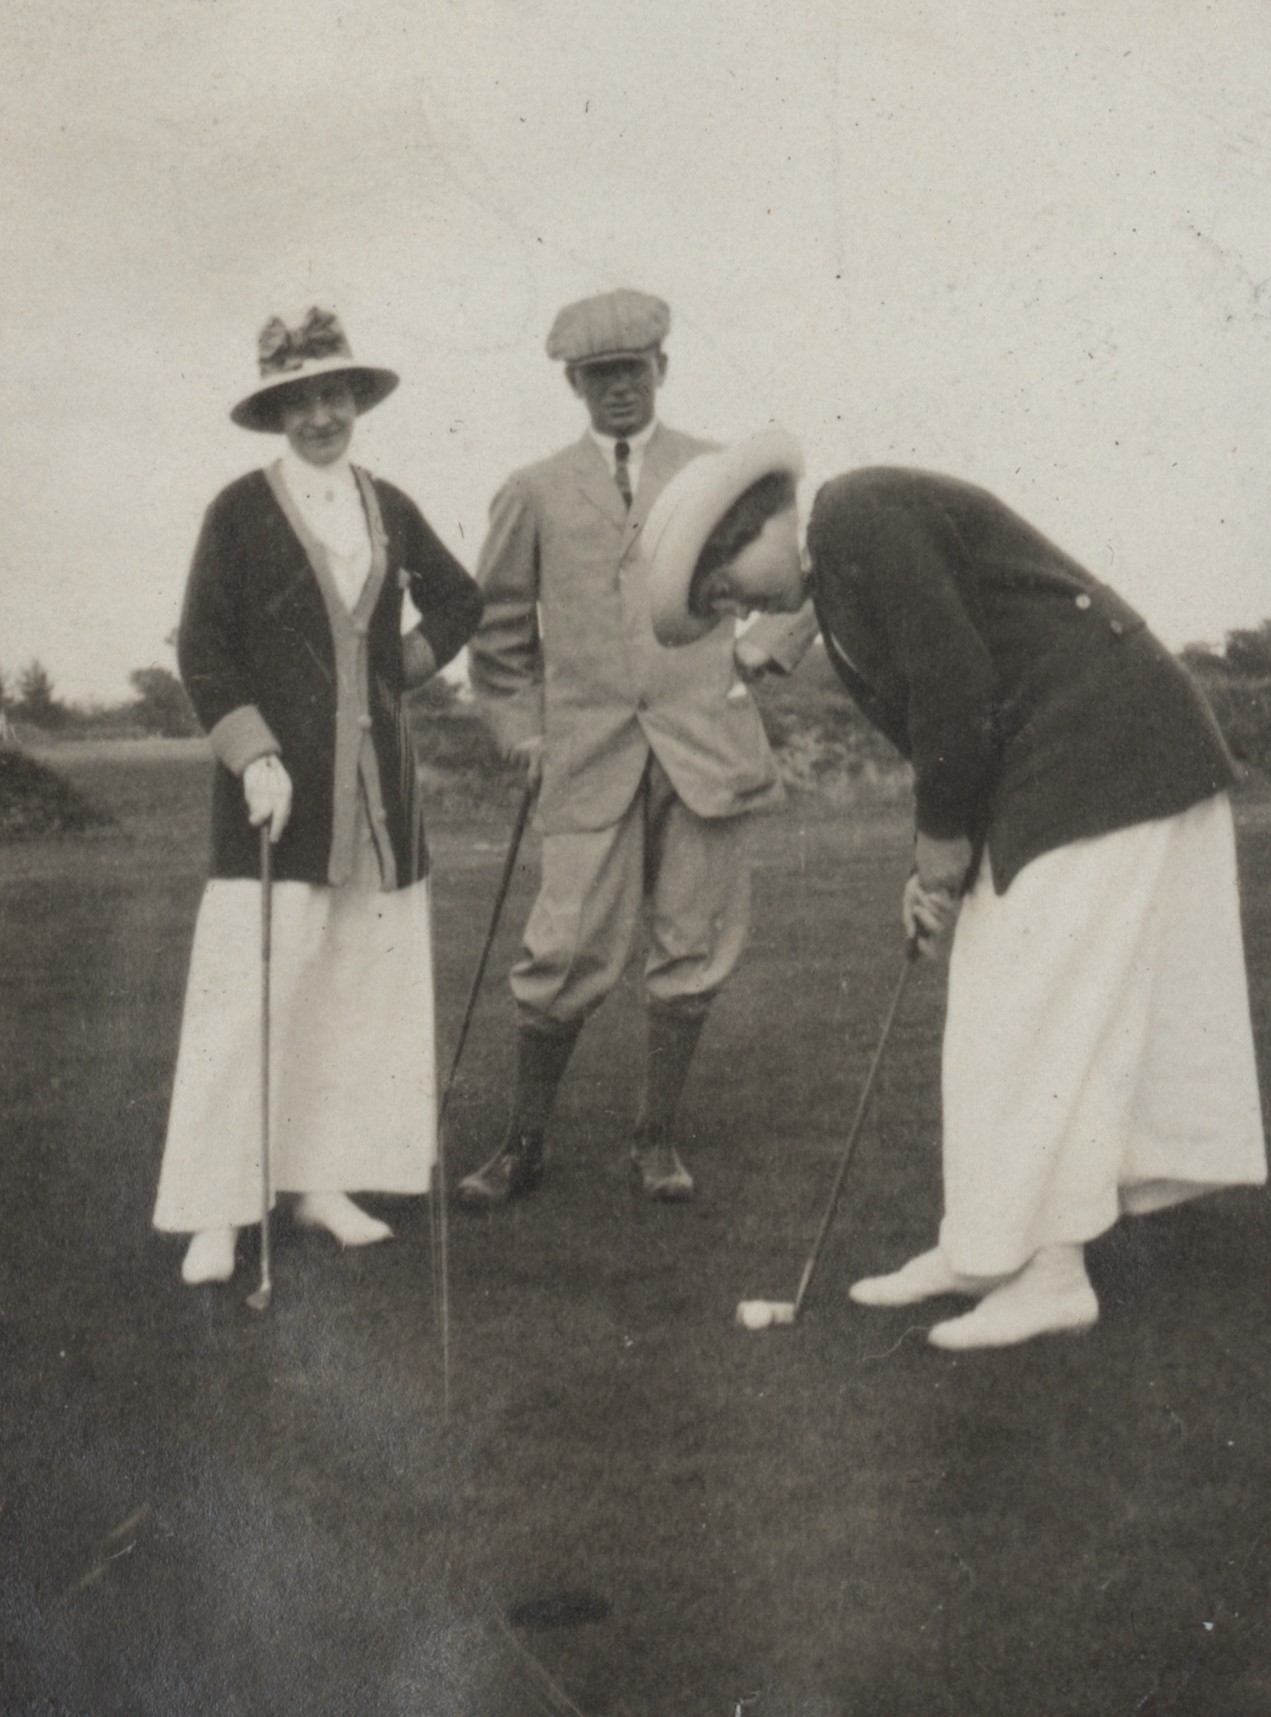 Photo of a man and two women playing golf. The woman on the right is getting ready to putt, and the hole is at the front of the photo. The other woman and the man are standing nearby, looking toward the camera. The man is wearing plus-fours golf attire with boots, a buttoned jacket, dress shirt and neck tie, and flat cap. The women wear long white skirts with long cardigans and wide-brimmed hats.